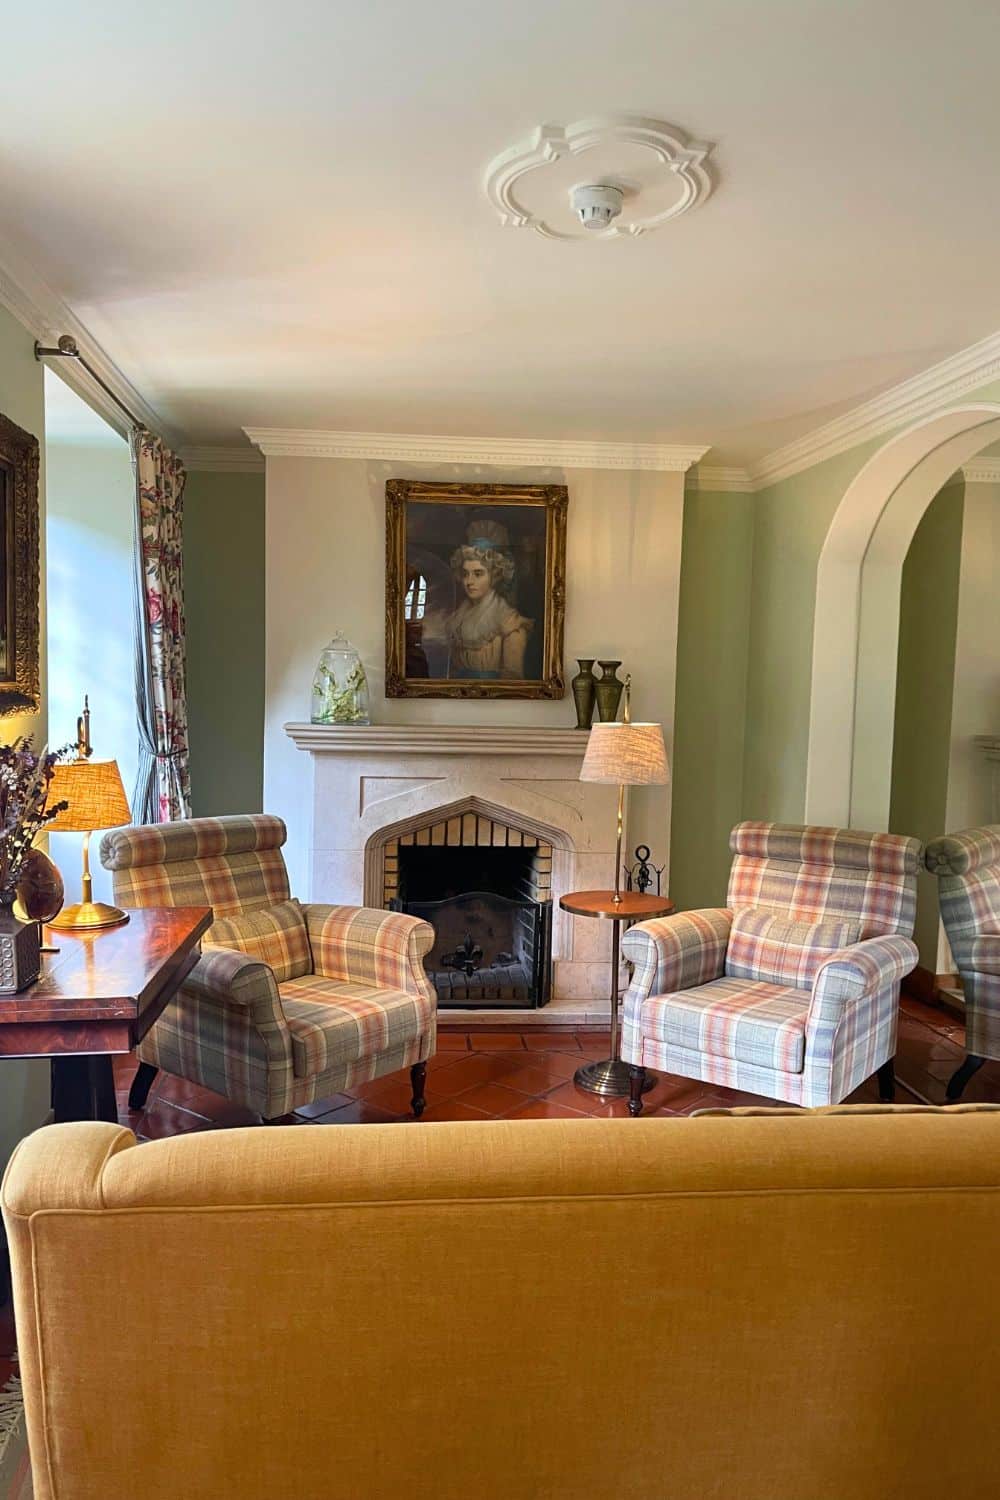 A cozy interior space within Lawrence's Hotel featuring a classic fireplace with an ornate painting above it, flanked by plush, patterned armchairs and an inviting golden sofa, all under warm lighting that highlights the room’s elegant decor and welcoming ambiance.